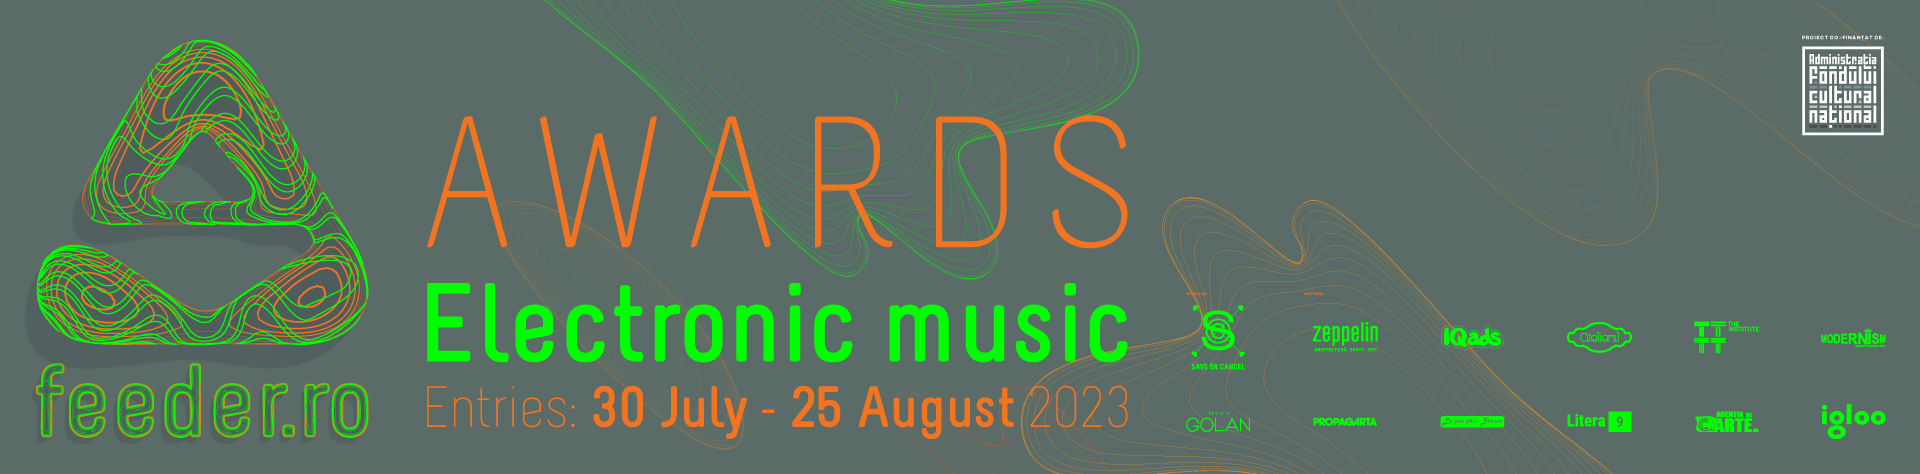 feeder.ro awards - open call for electronic music compositions